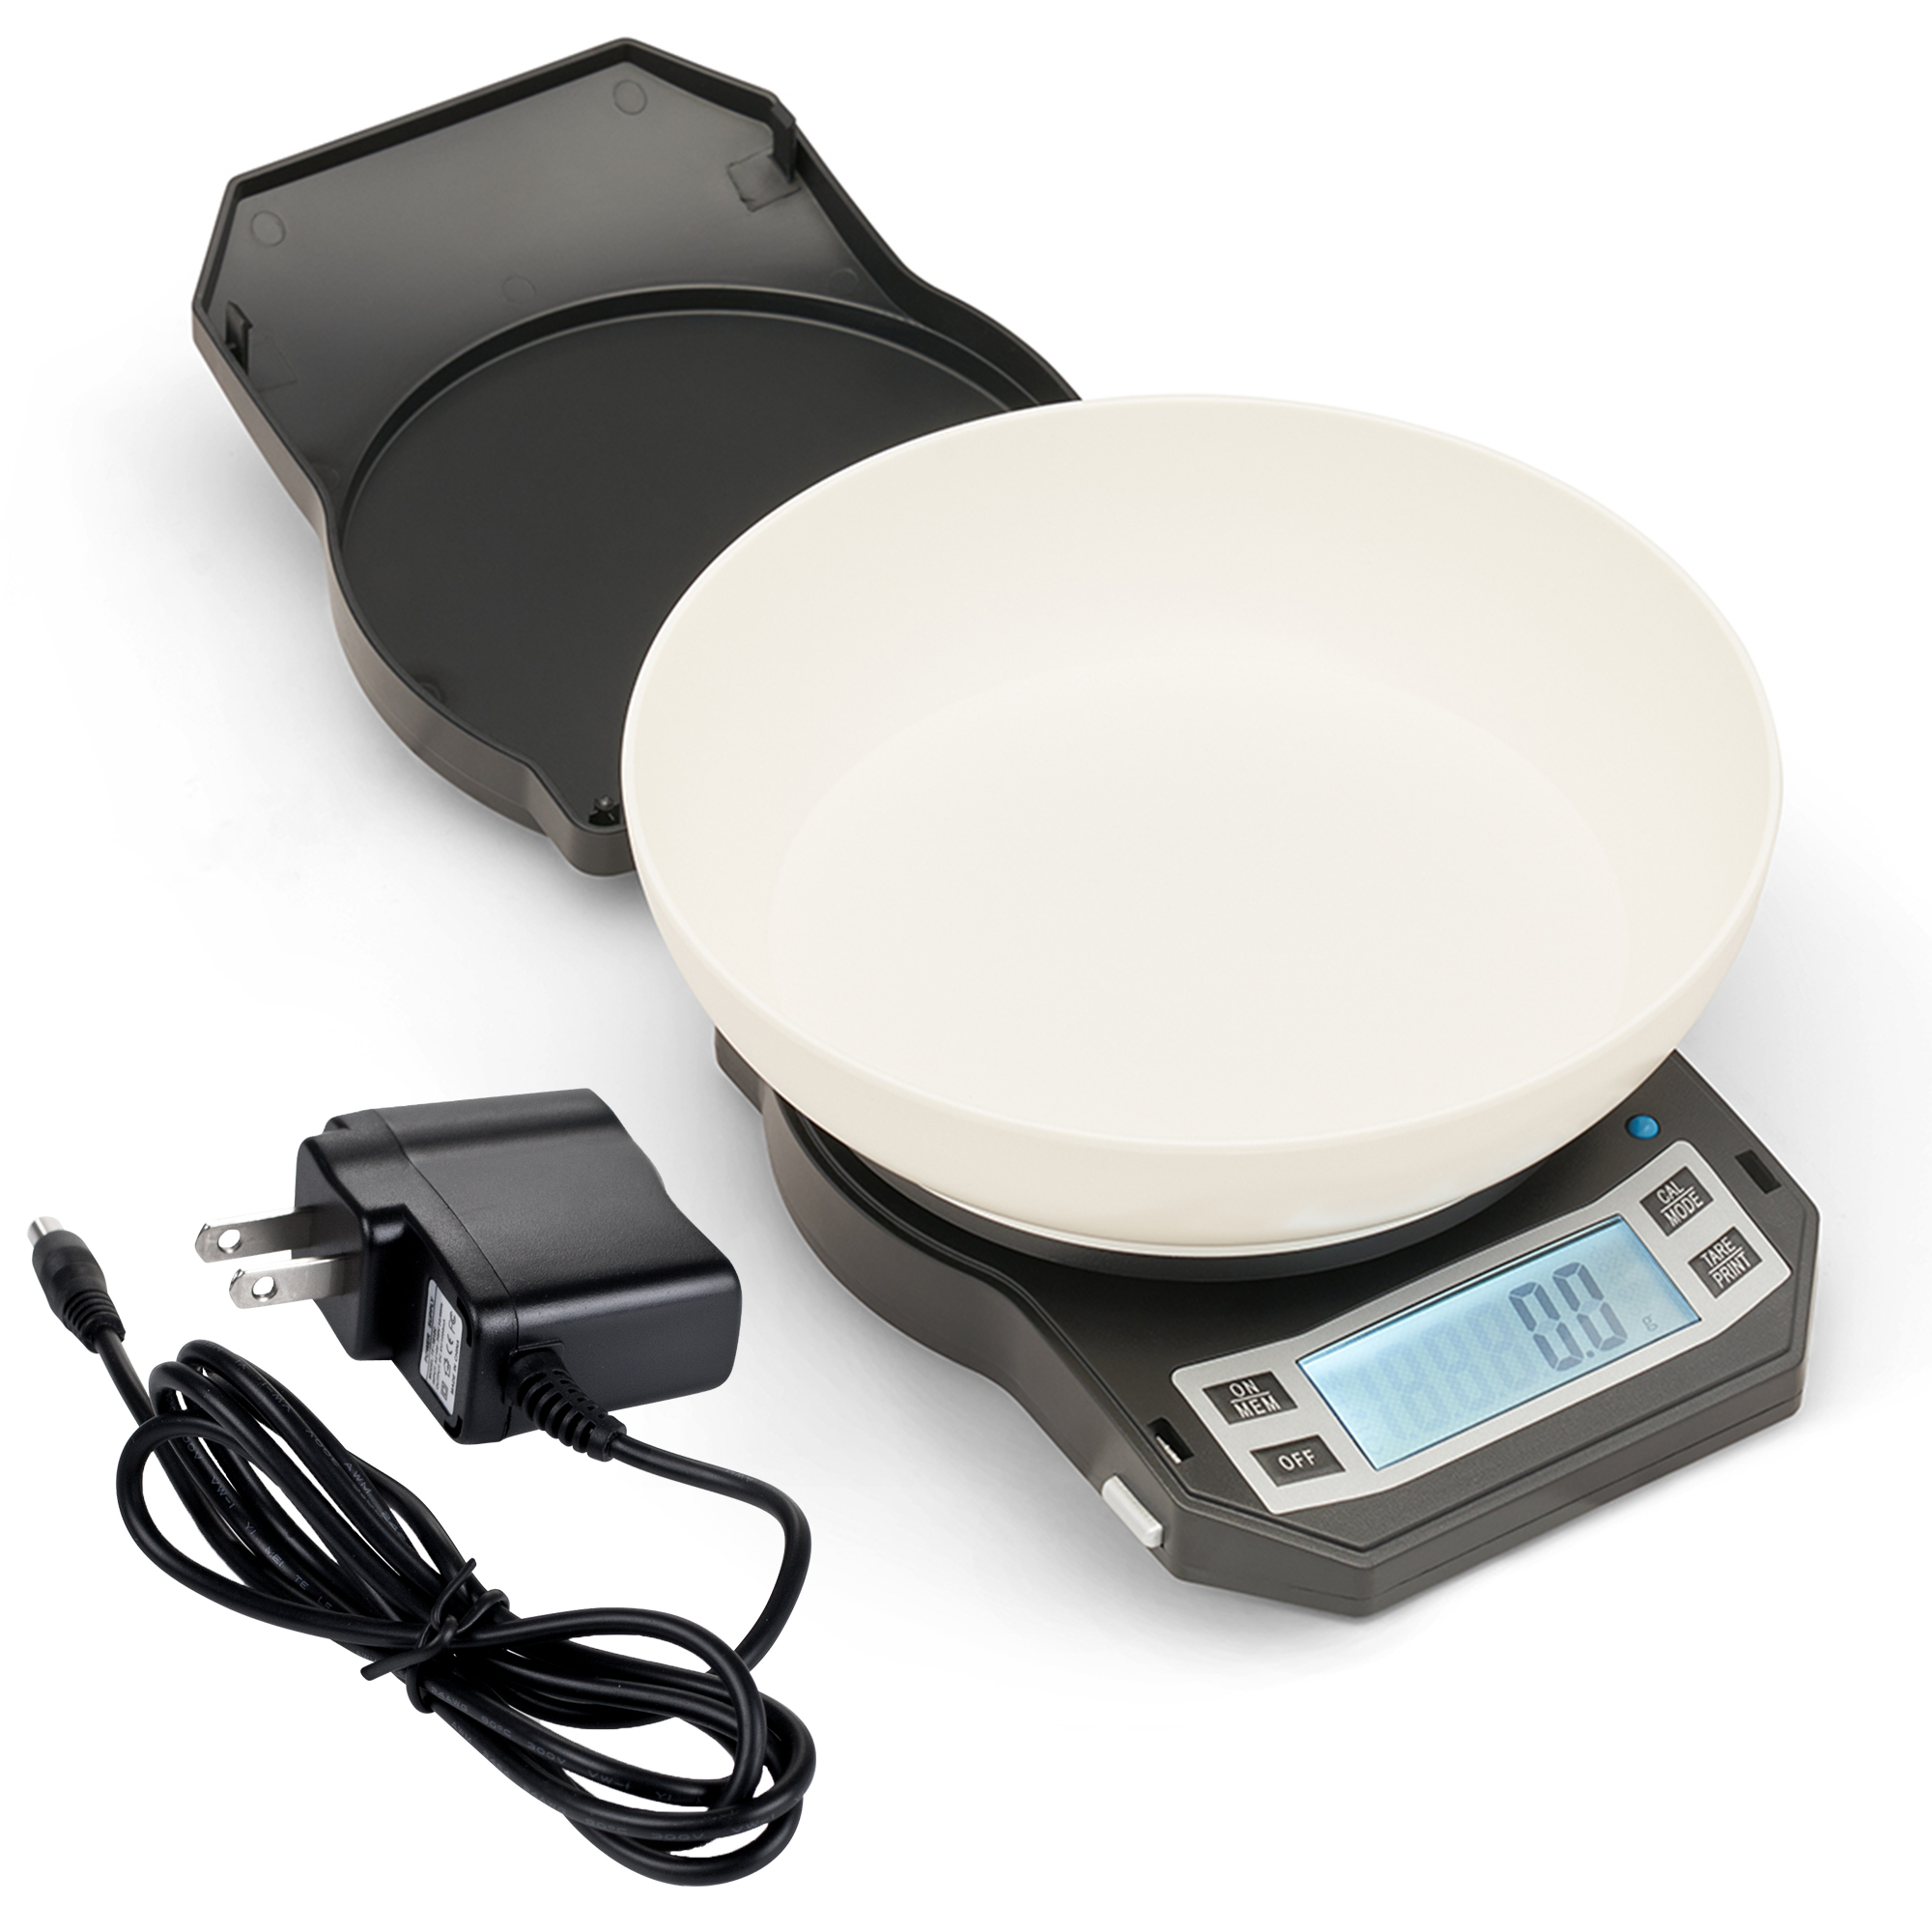 American Weigh Scales - Collapsible Kitchen Scale